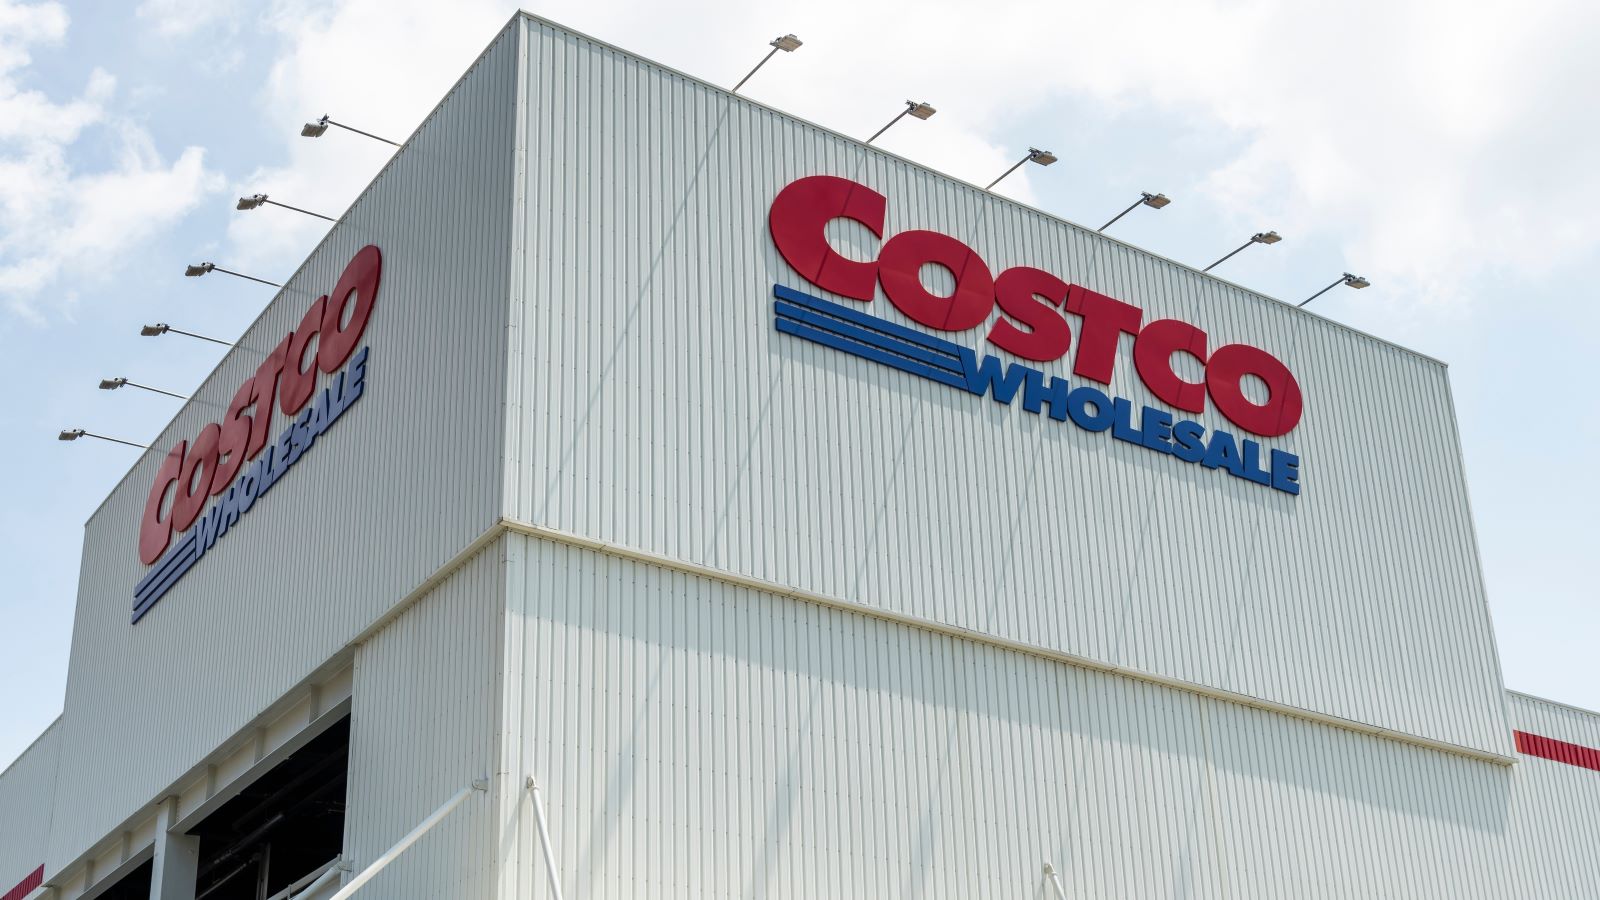 Shopping Smart at Costco: 10 Best Deals That Keep Your Wallet Happy